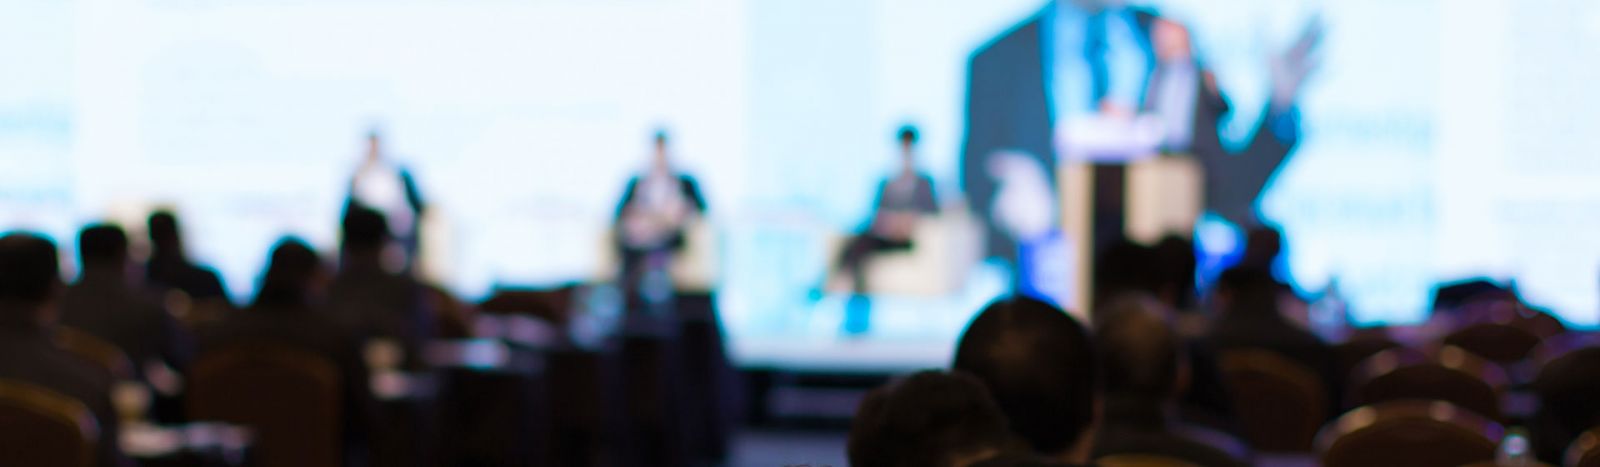 Blurred image of presenters on stage at a conference banner image